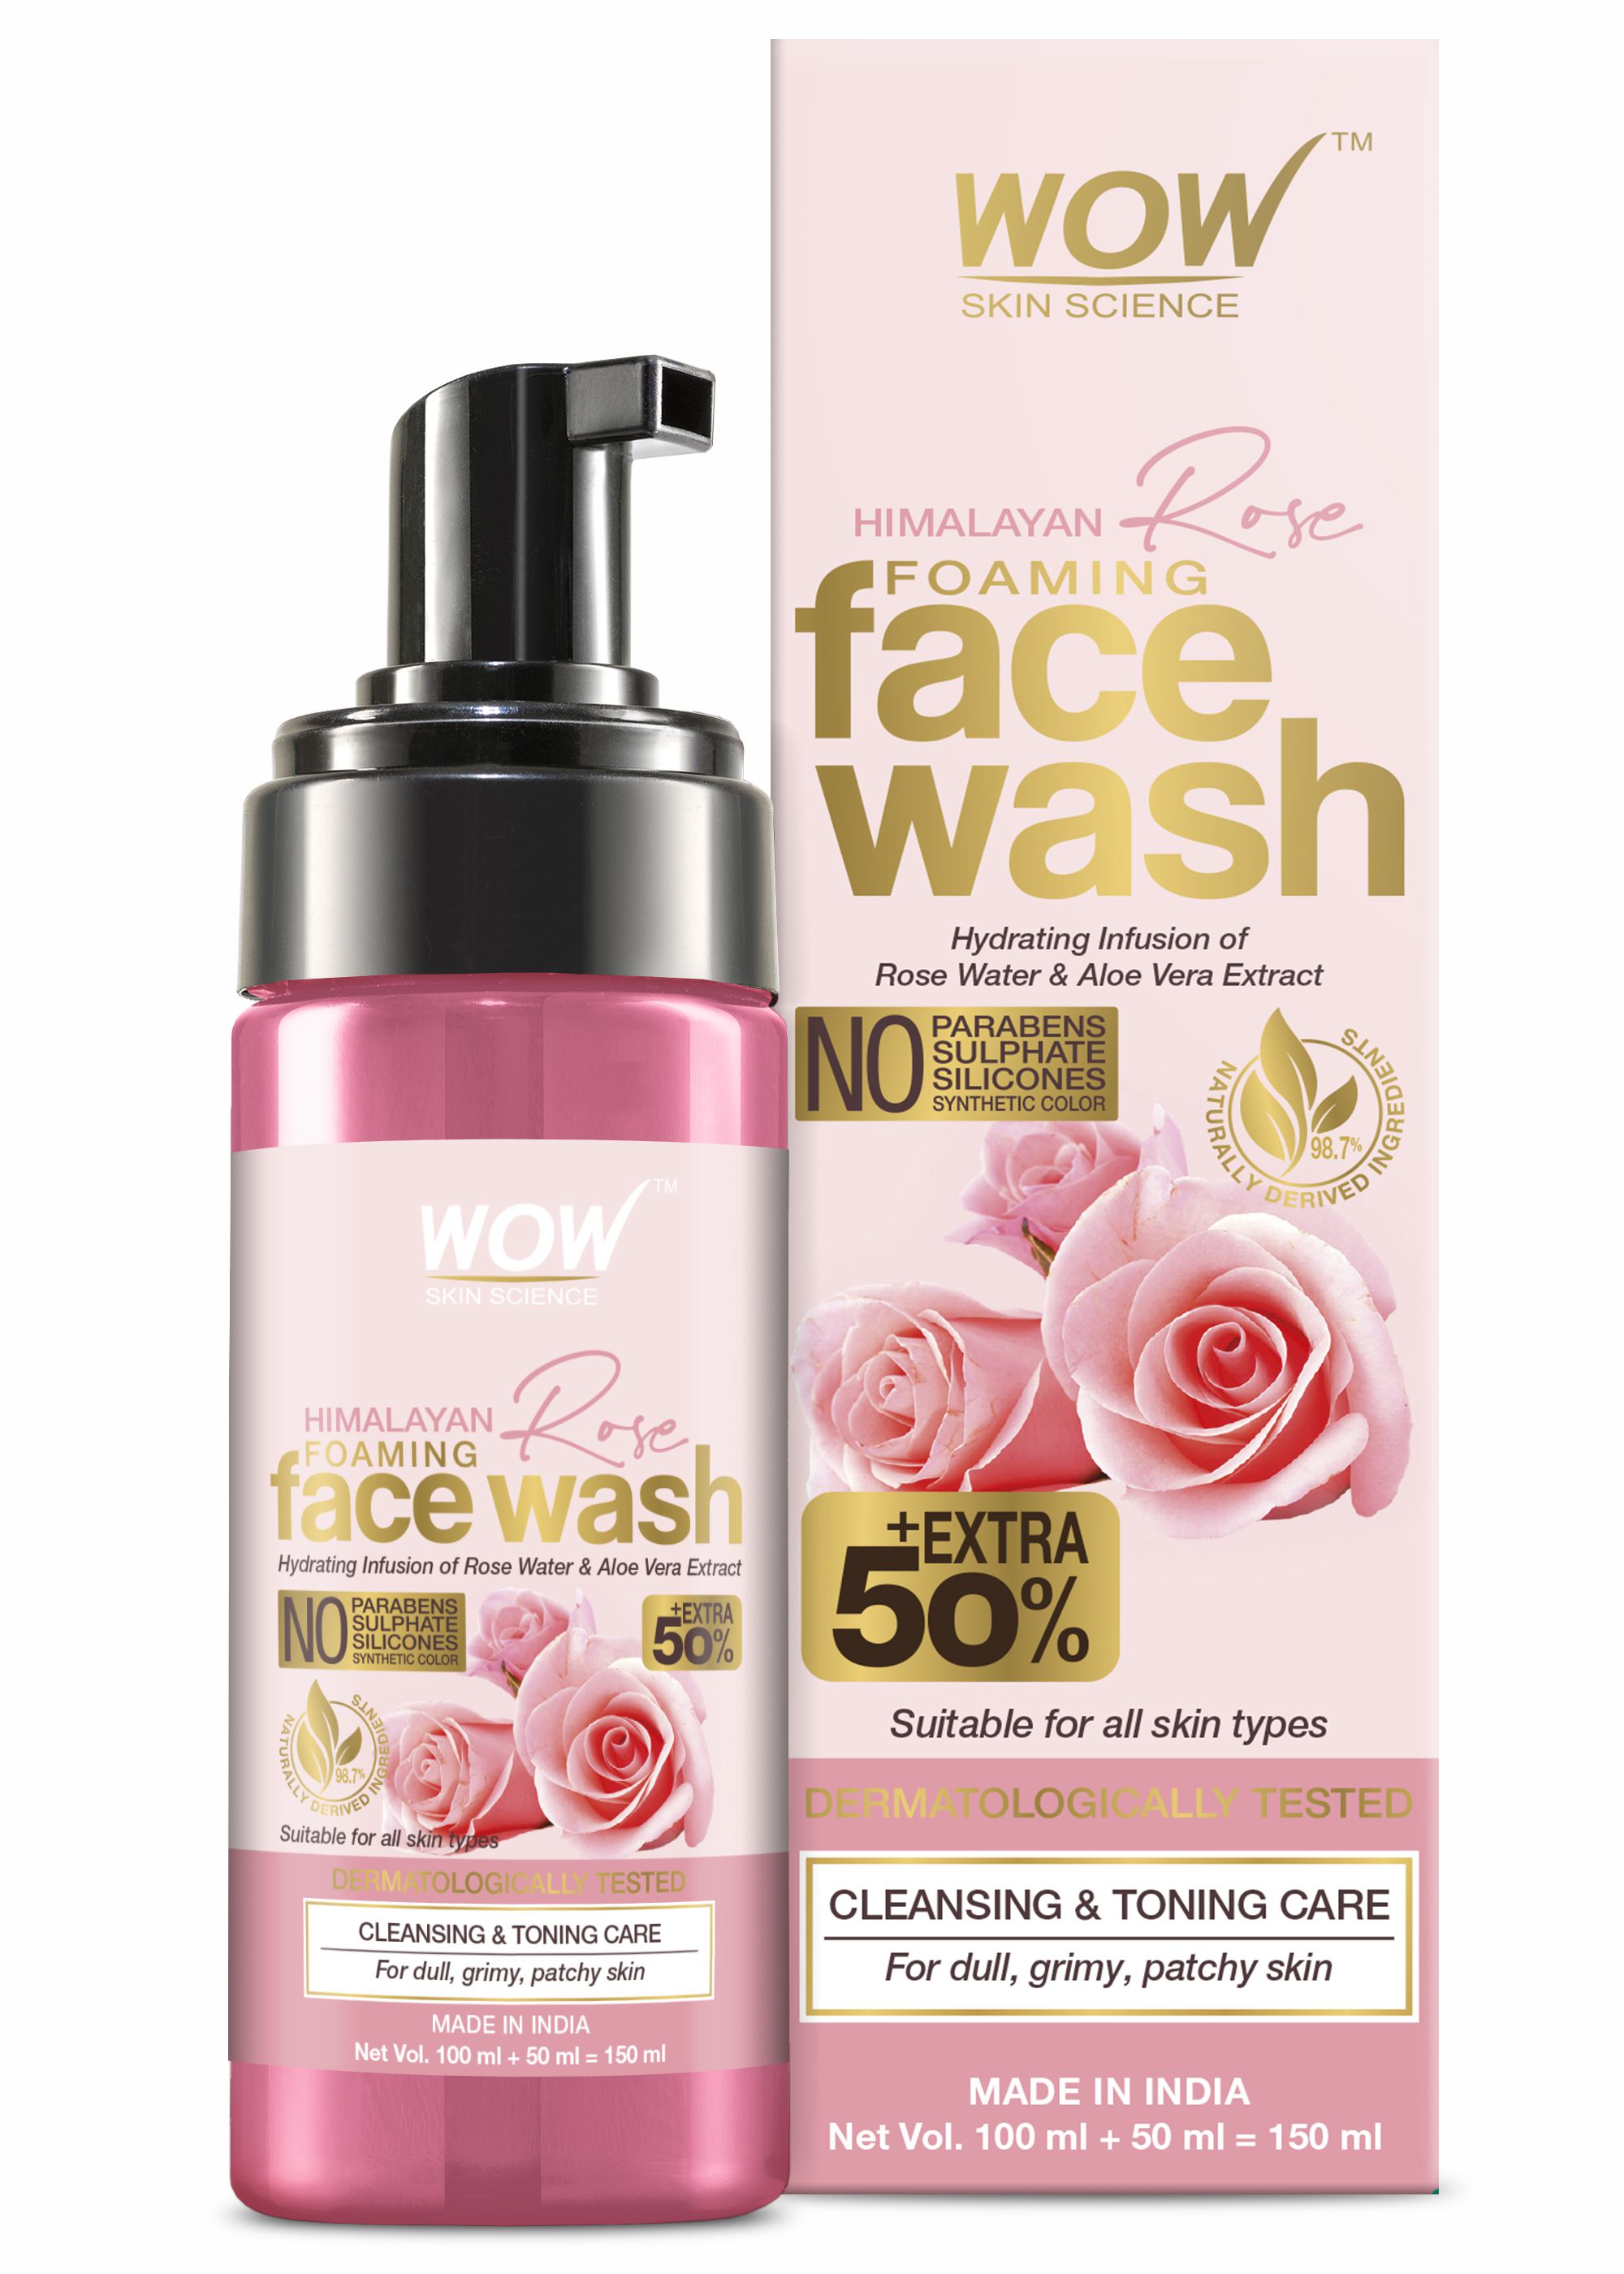     			WOW Skin Science Himalayan Rose Face Wash Tube - for Cleansing & Toning- No Parabens, Sulphates, Silicones & Color - 100mL